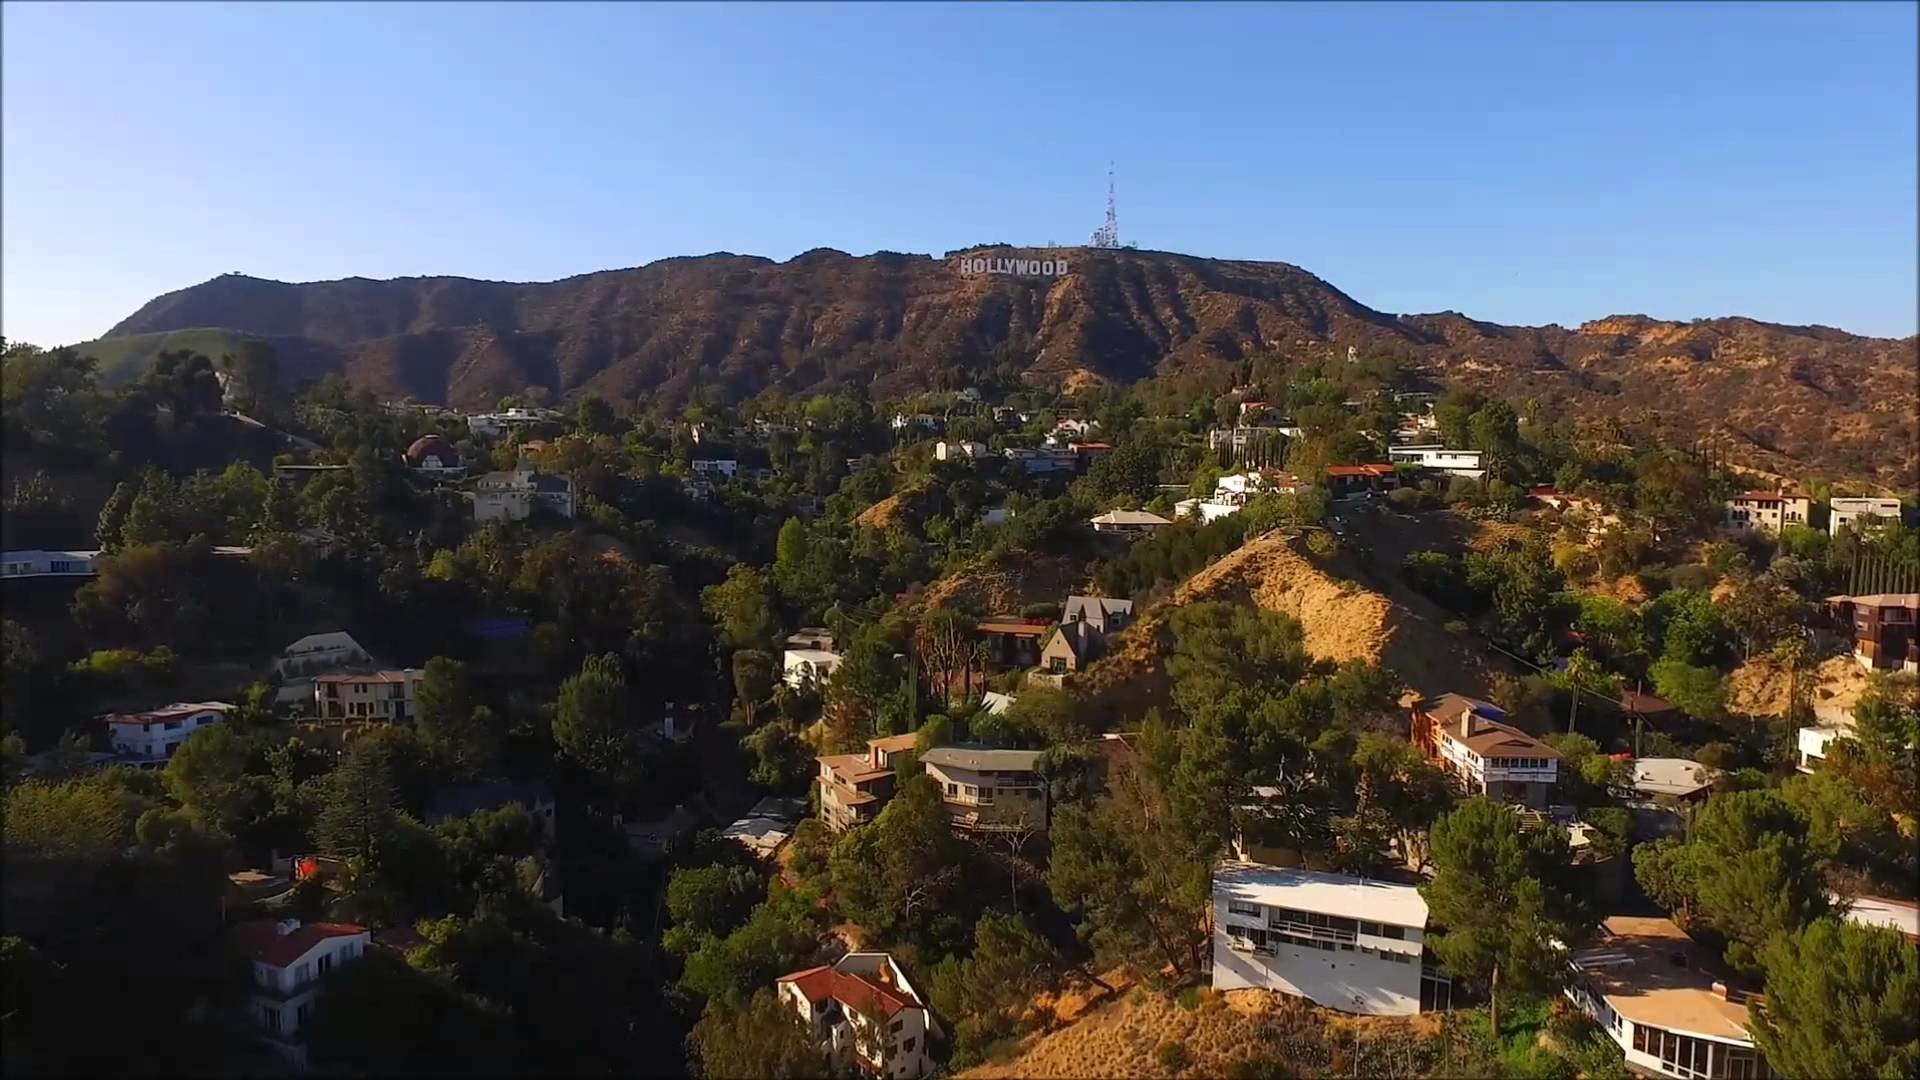 1920x1080 Hollywood Hills and Hollywood sign - YouTube